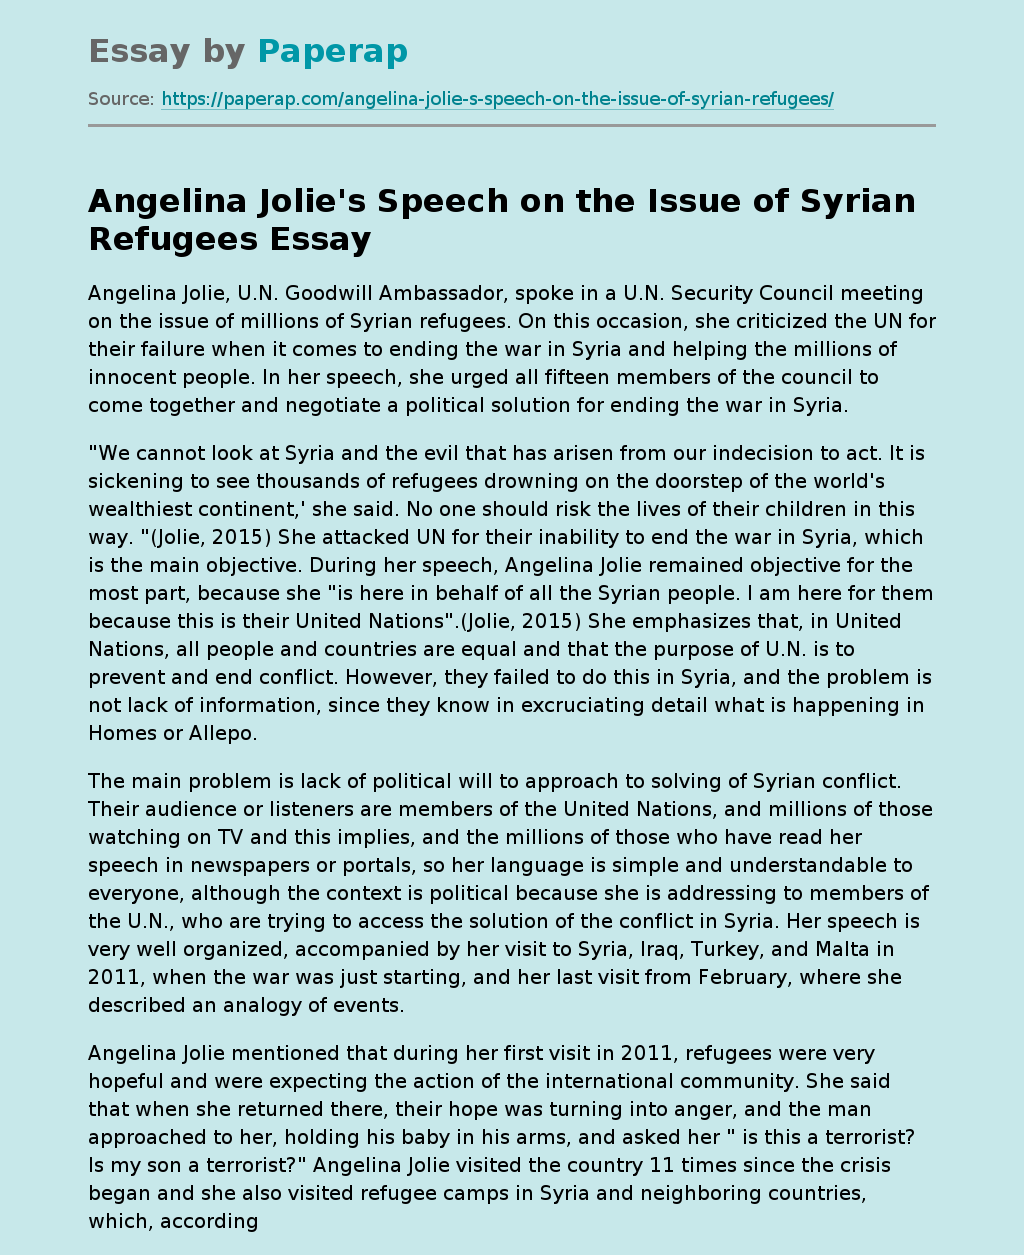 Angelina Jolie's Speech on the Issue of Syrian Refugees